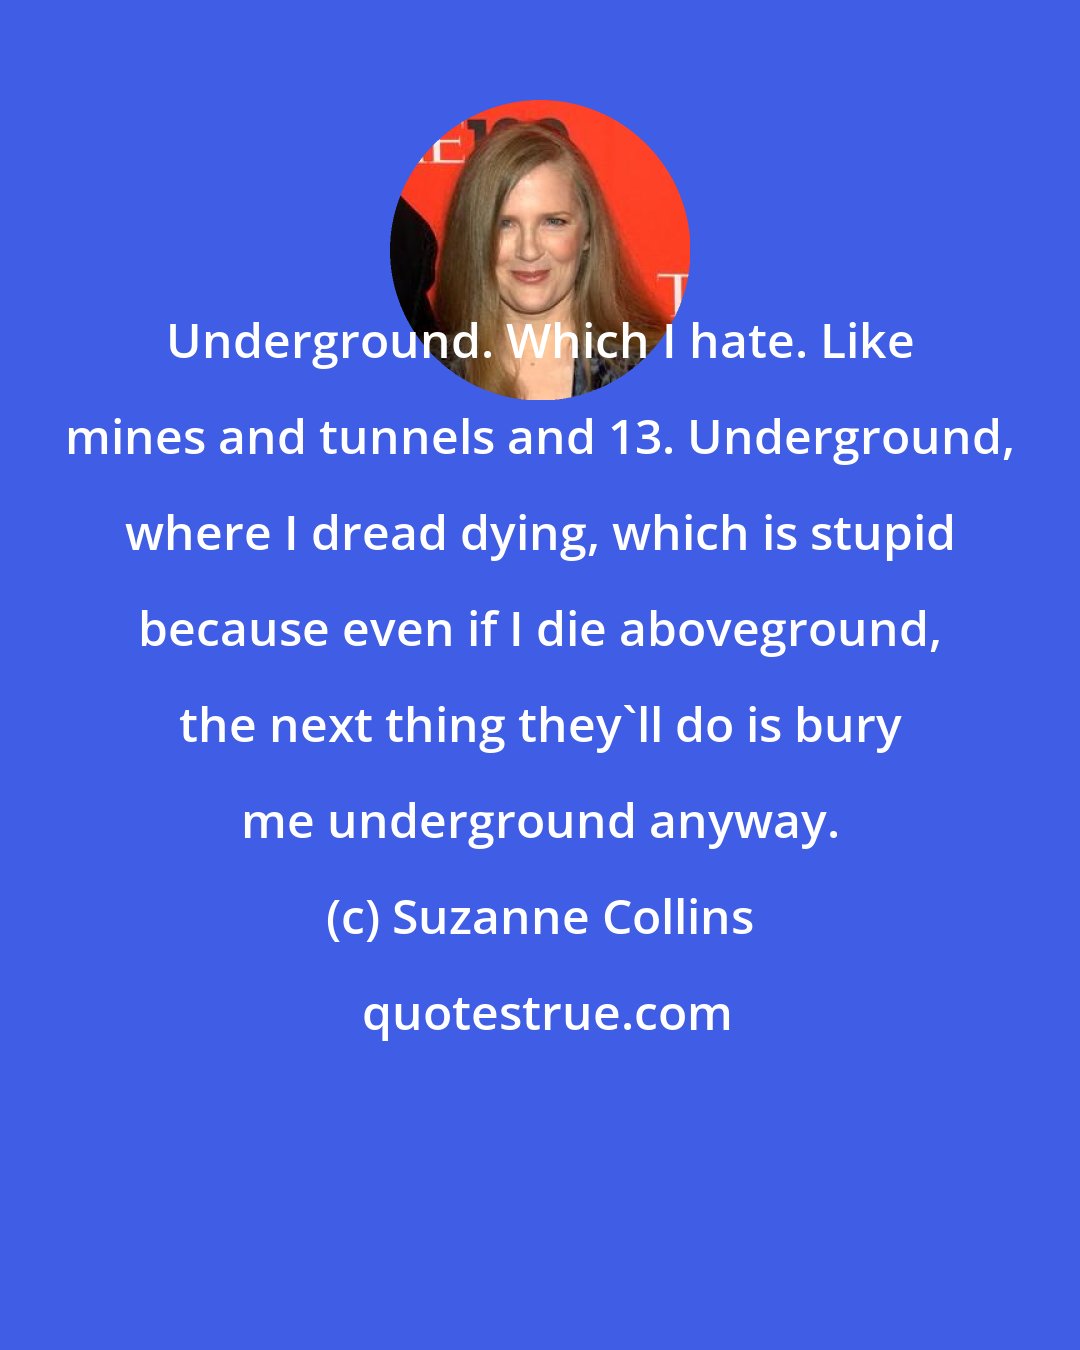 Suzanne Collins: Underground. Which I hate. Like mines and tunnels and 13. Underground, where I dread dying, which is stupid because even if I die aboveground, the next thing they'll do is bury me underground anyway.